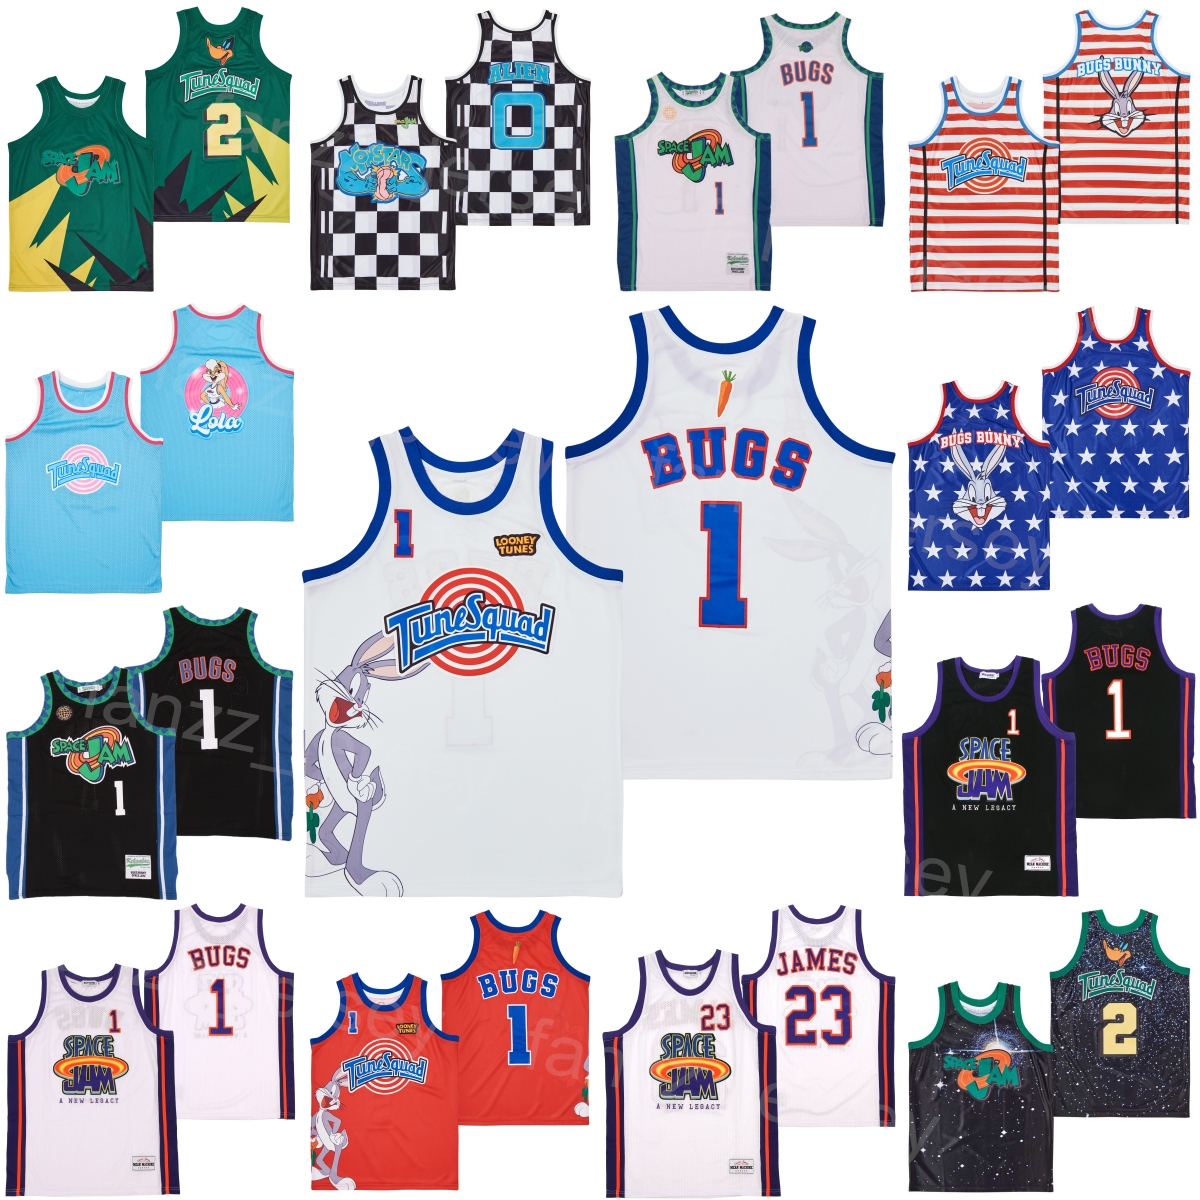 

Basketball Moive 1 Bugs Bunny Jersey Space Jam Tune Squad Looney 23 Lebron James LEGACY SUPERSTAR MONSTARS CHECKERED LOLA TUNESQUAD STRIPED Pullover High School, Black